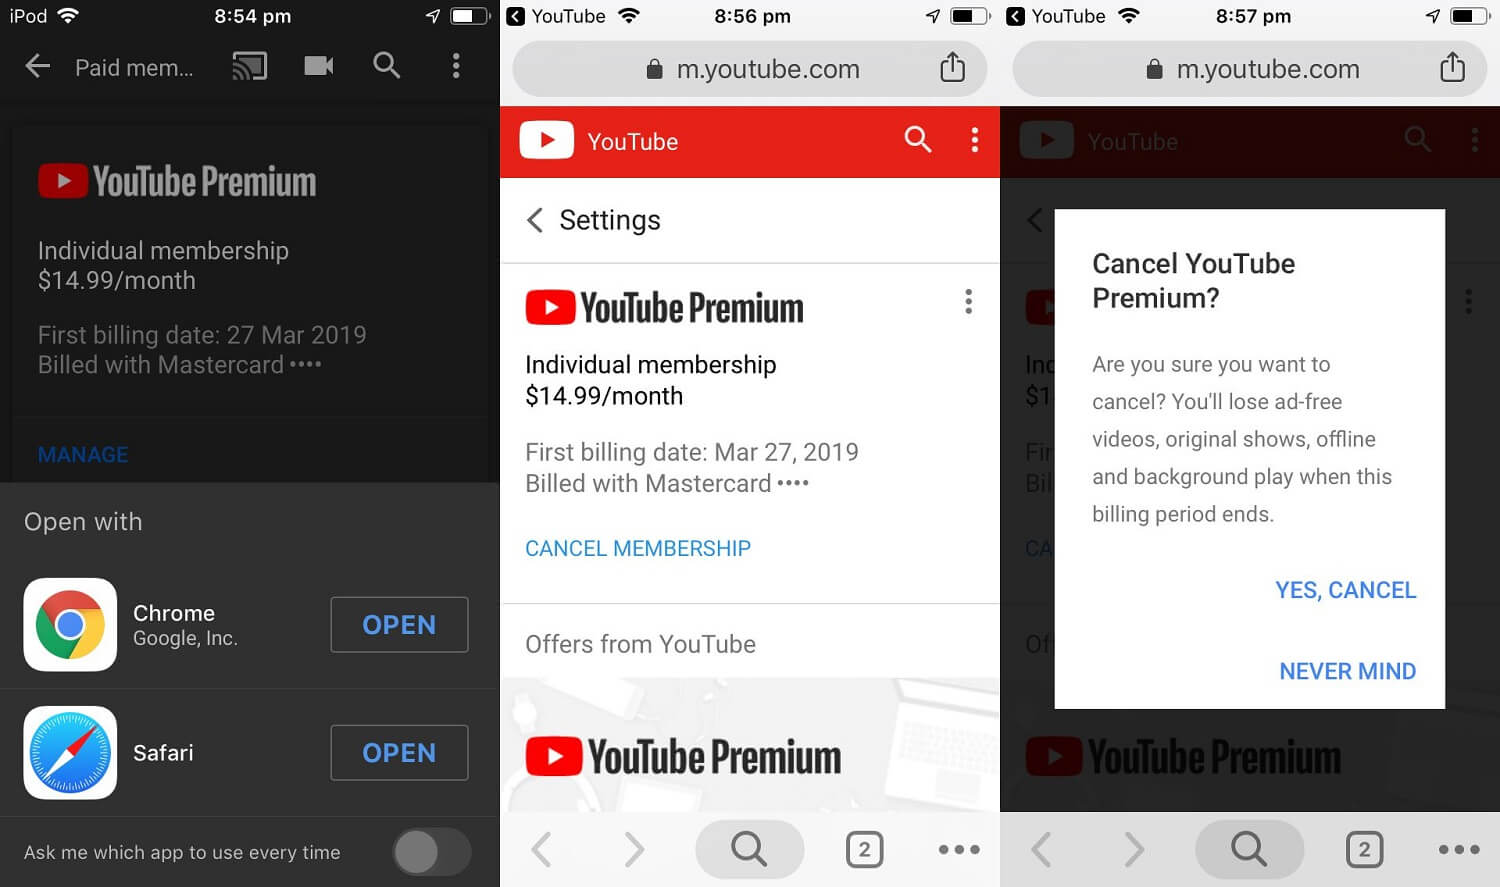 Open the YouTube app on your device and tap on your profile picture on the top right-hand side